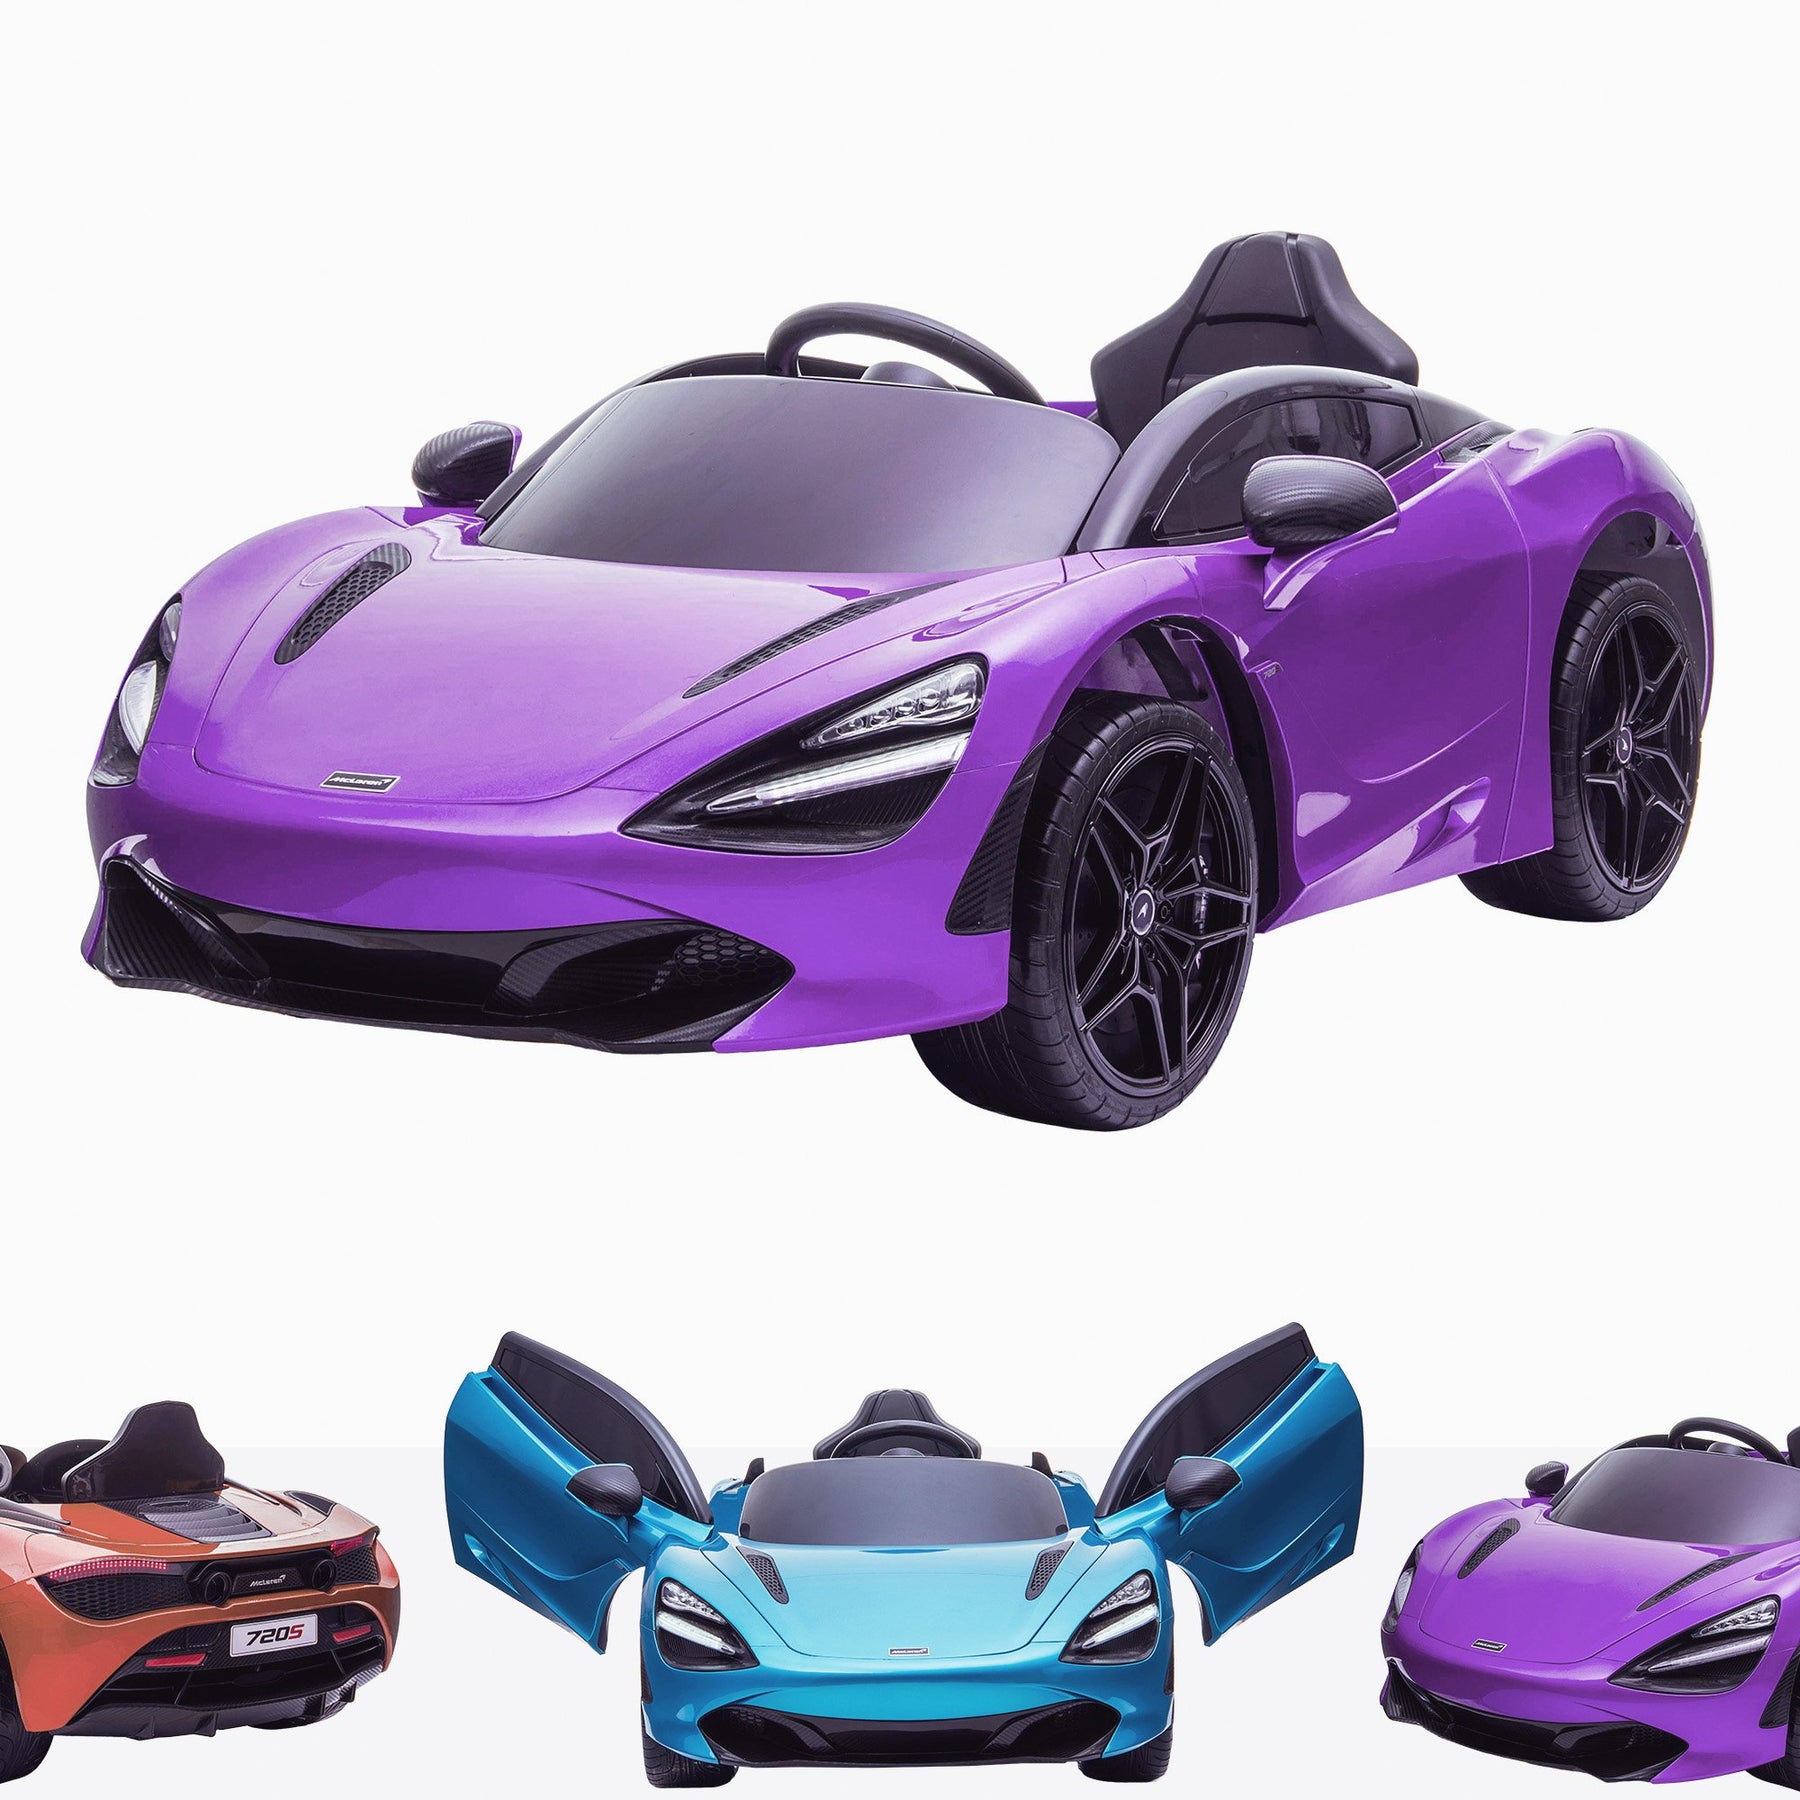 Here's The Top 10 RiiRoo Ride On Cars This June 2020